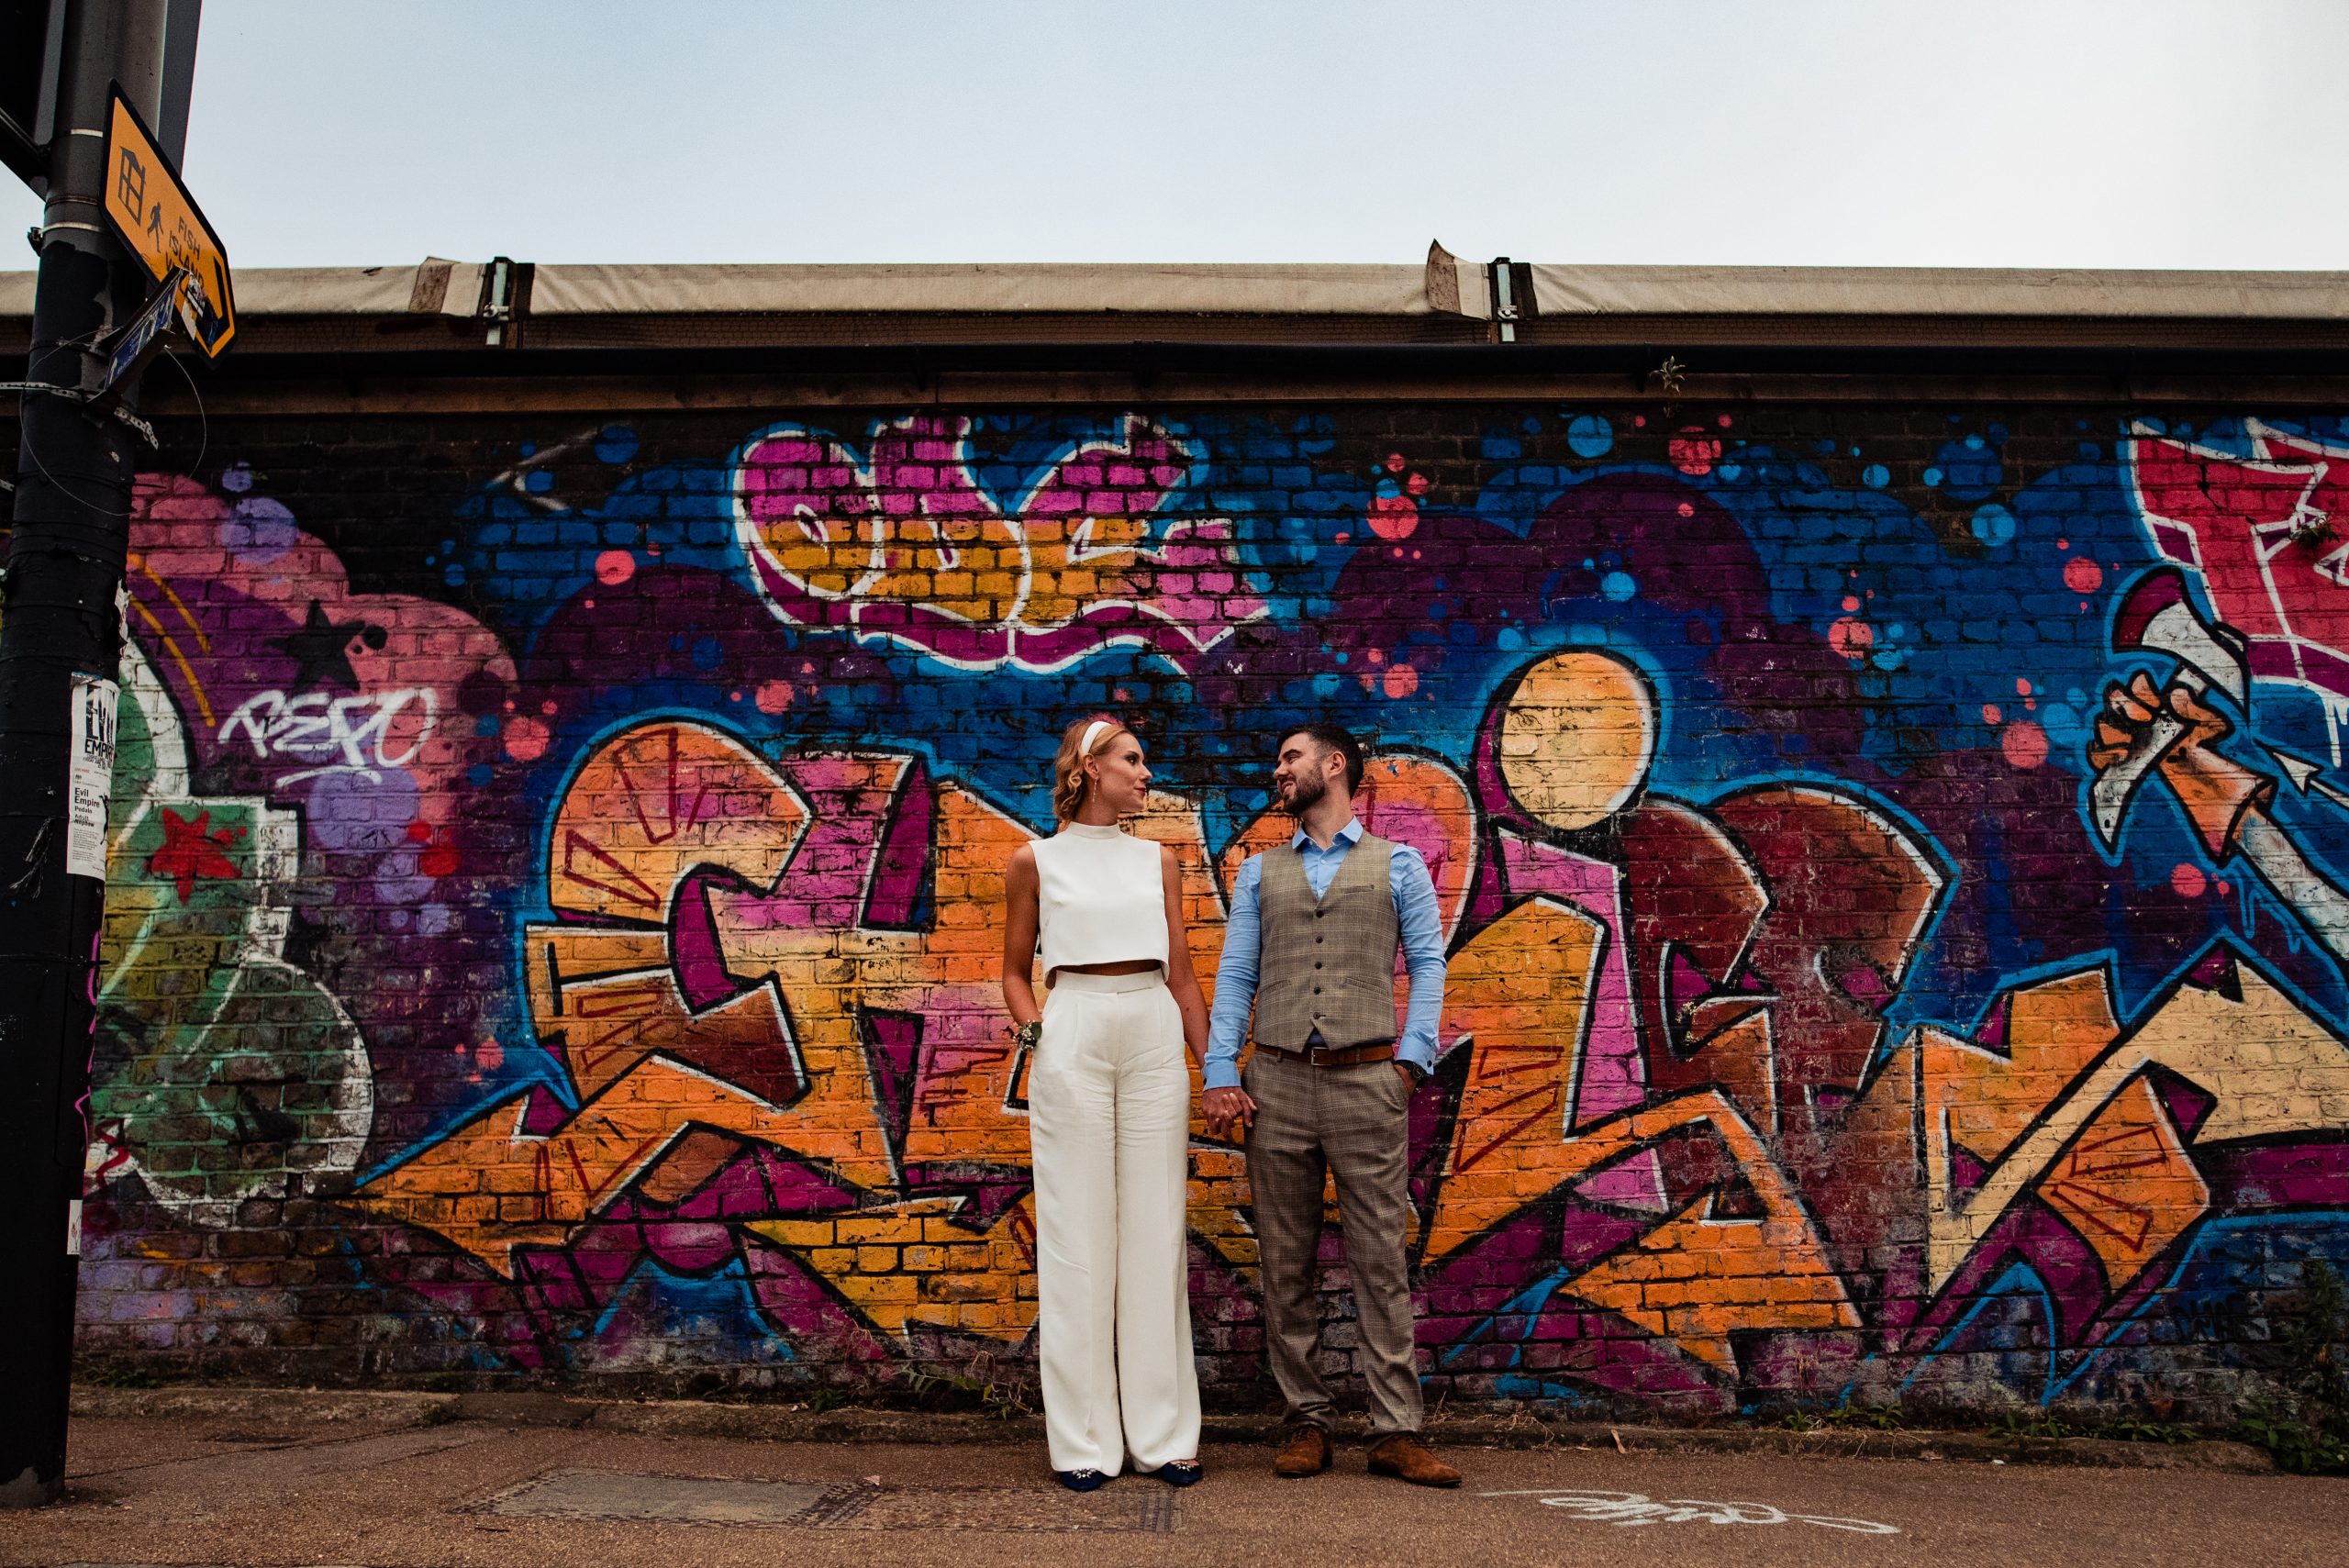 Bride & groom standing in front of a graffiti wall mural